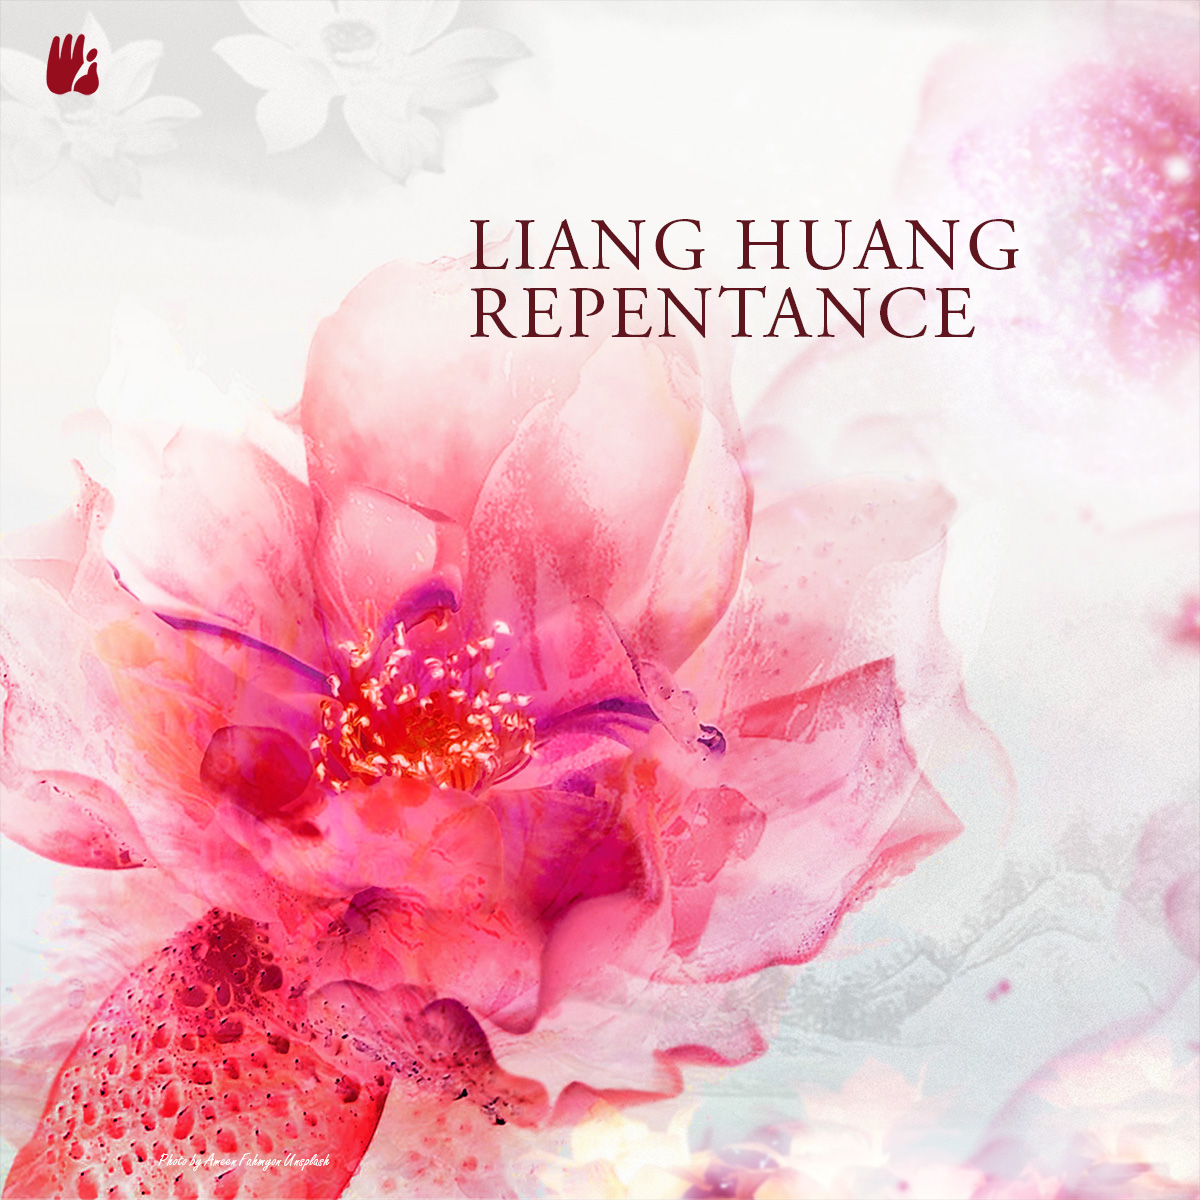 Liang Huang Repentance Ceremony (In Chinese)